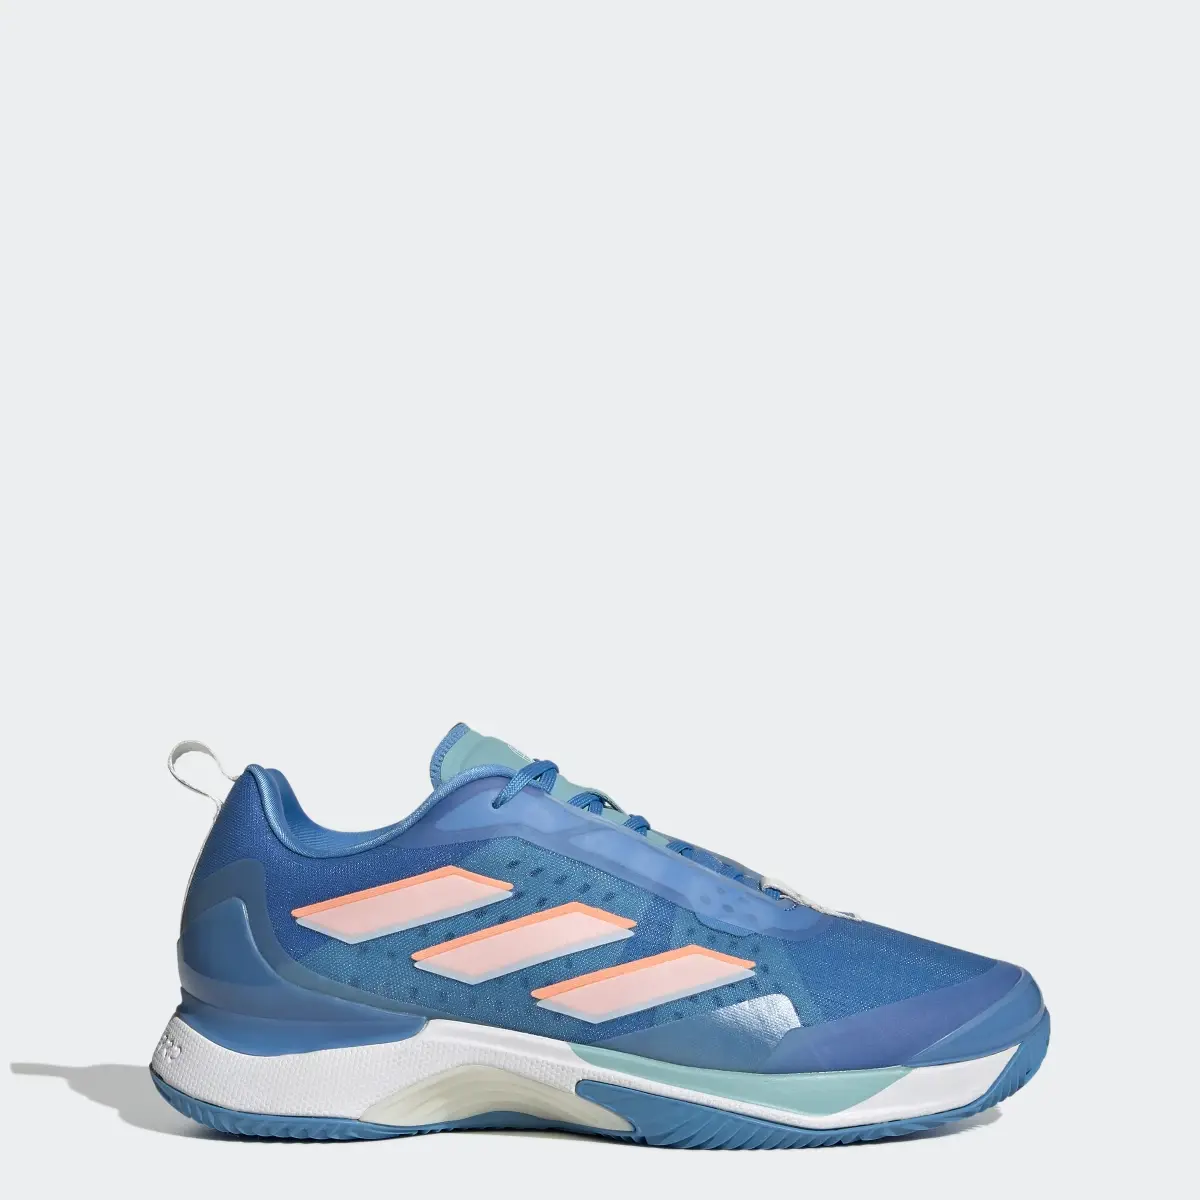 Adidas Avacourt Clay Court Tennis Shoes. 1